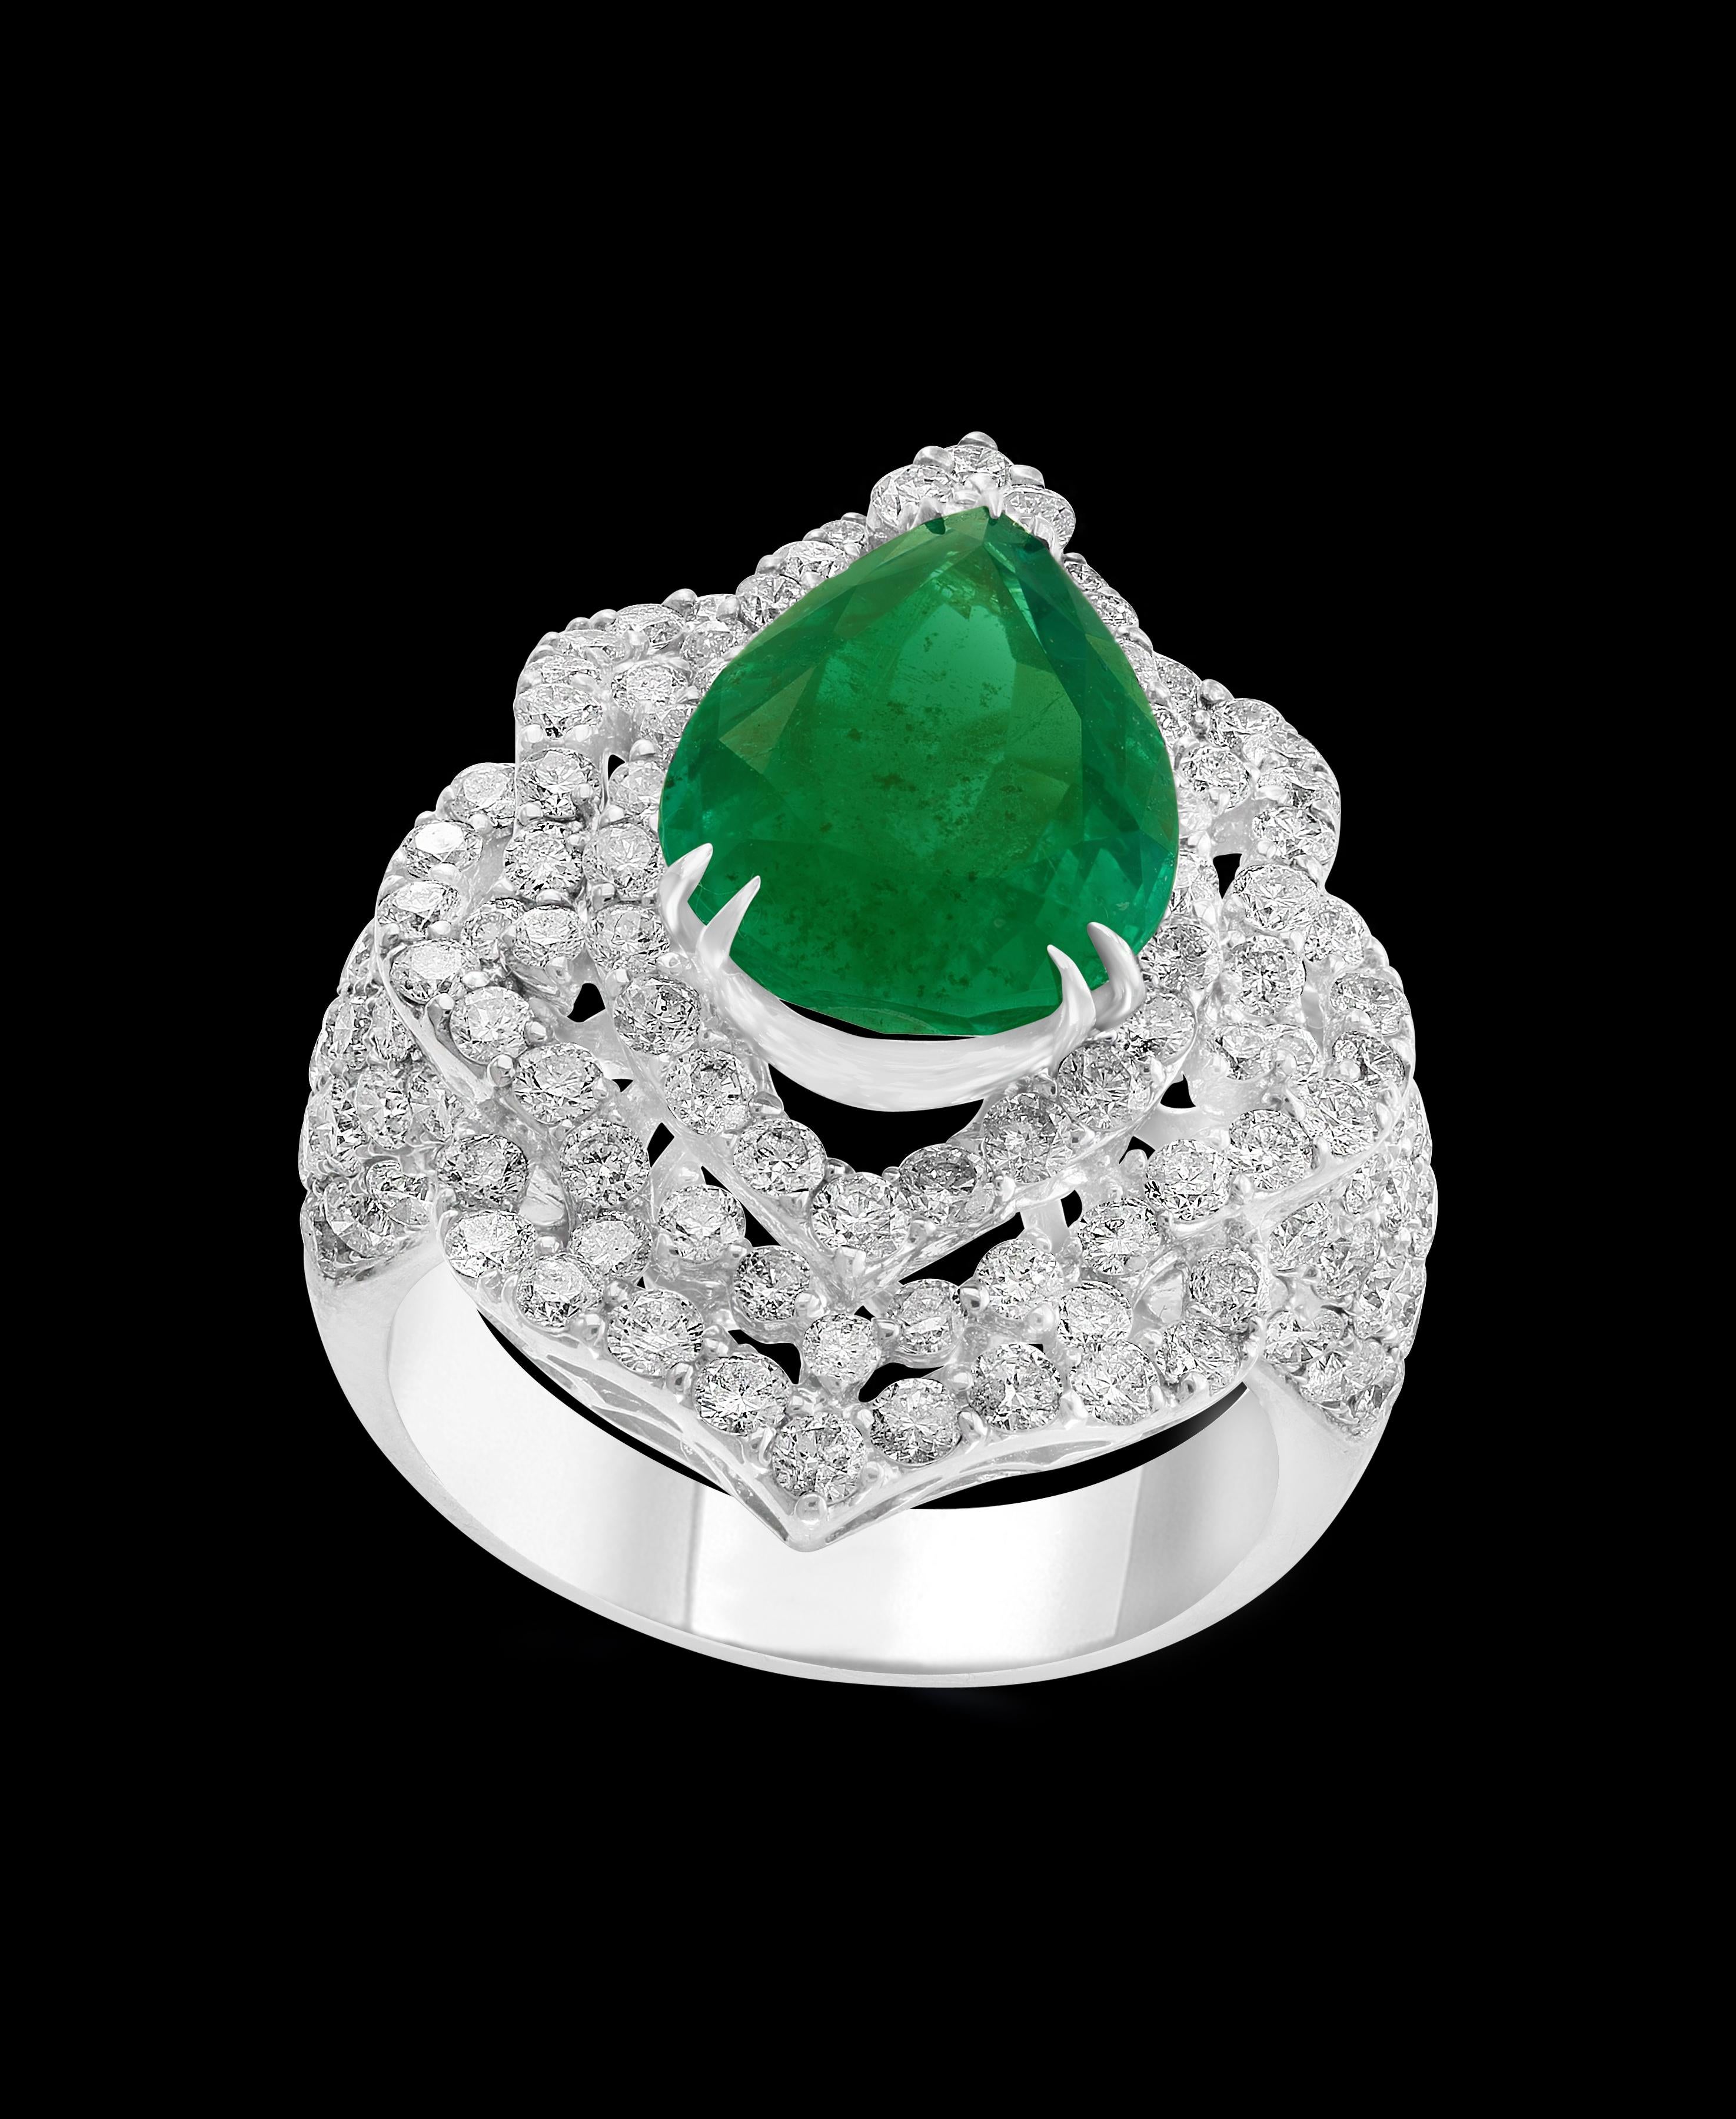 4.75 Carat Pear Cut Colombian Emerald & Diamond 18 Karat Gold Ring Estate Size 7 In Excellent Condition For Sale In New York, NY